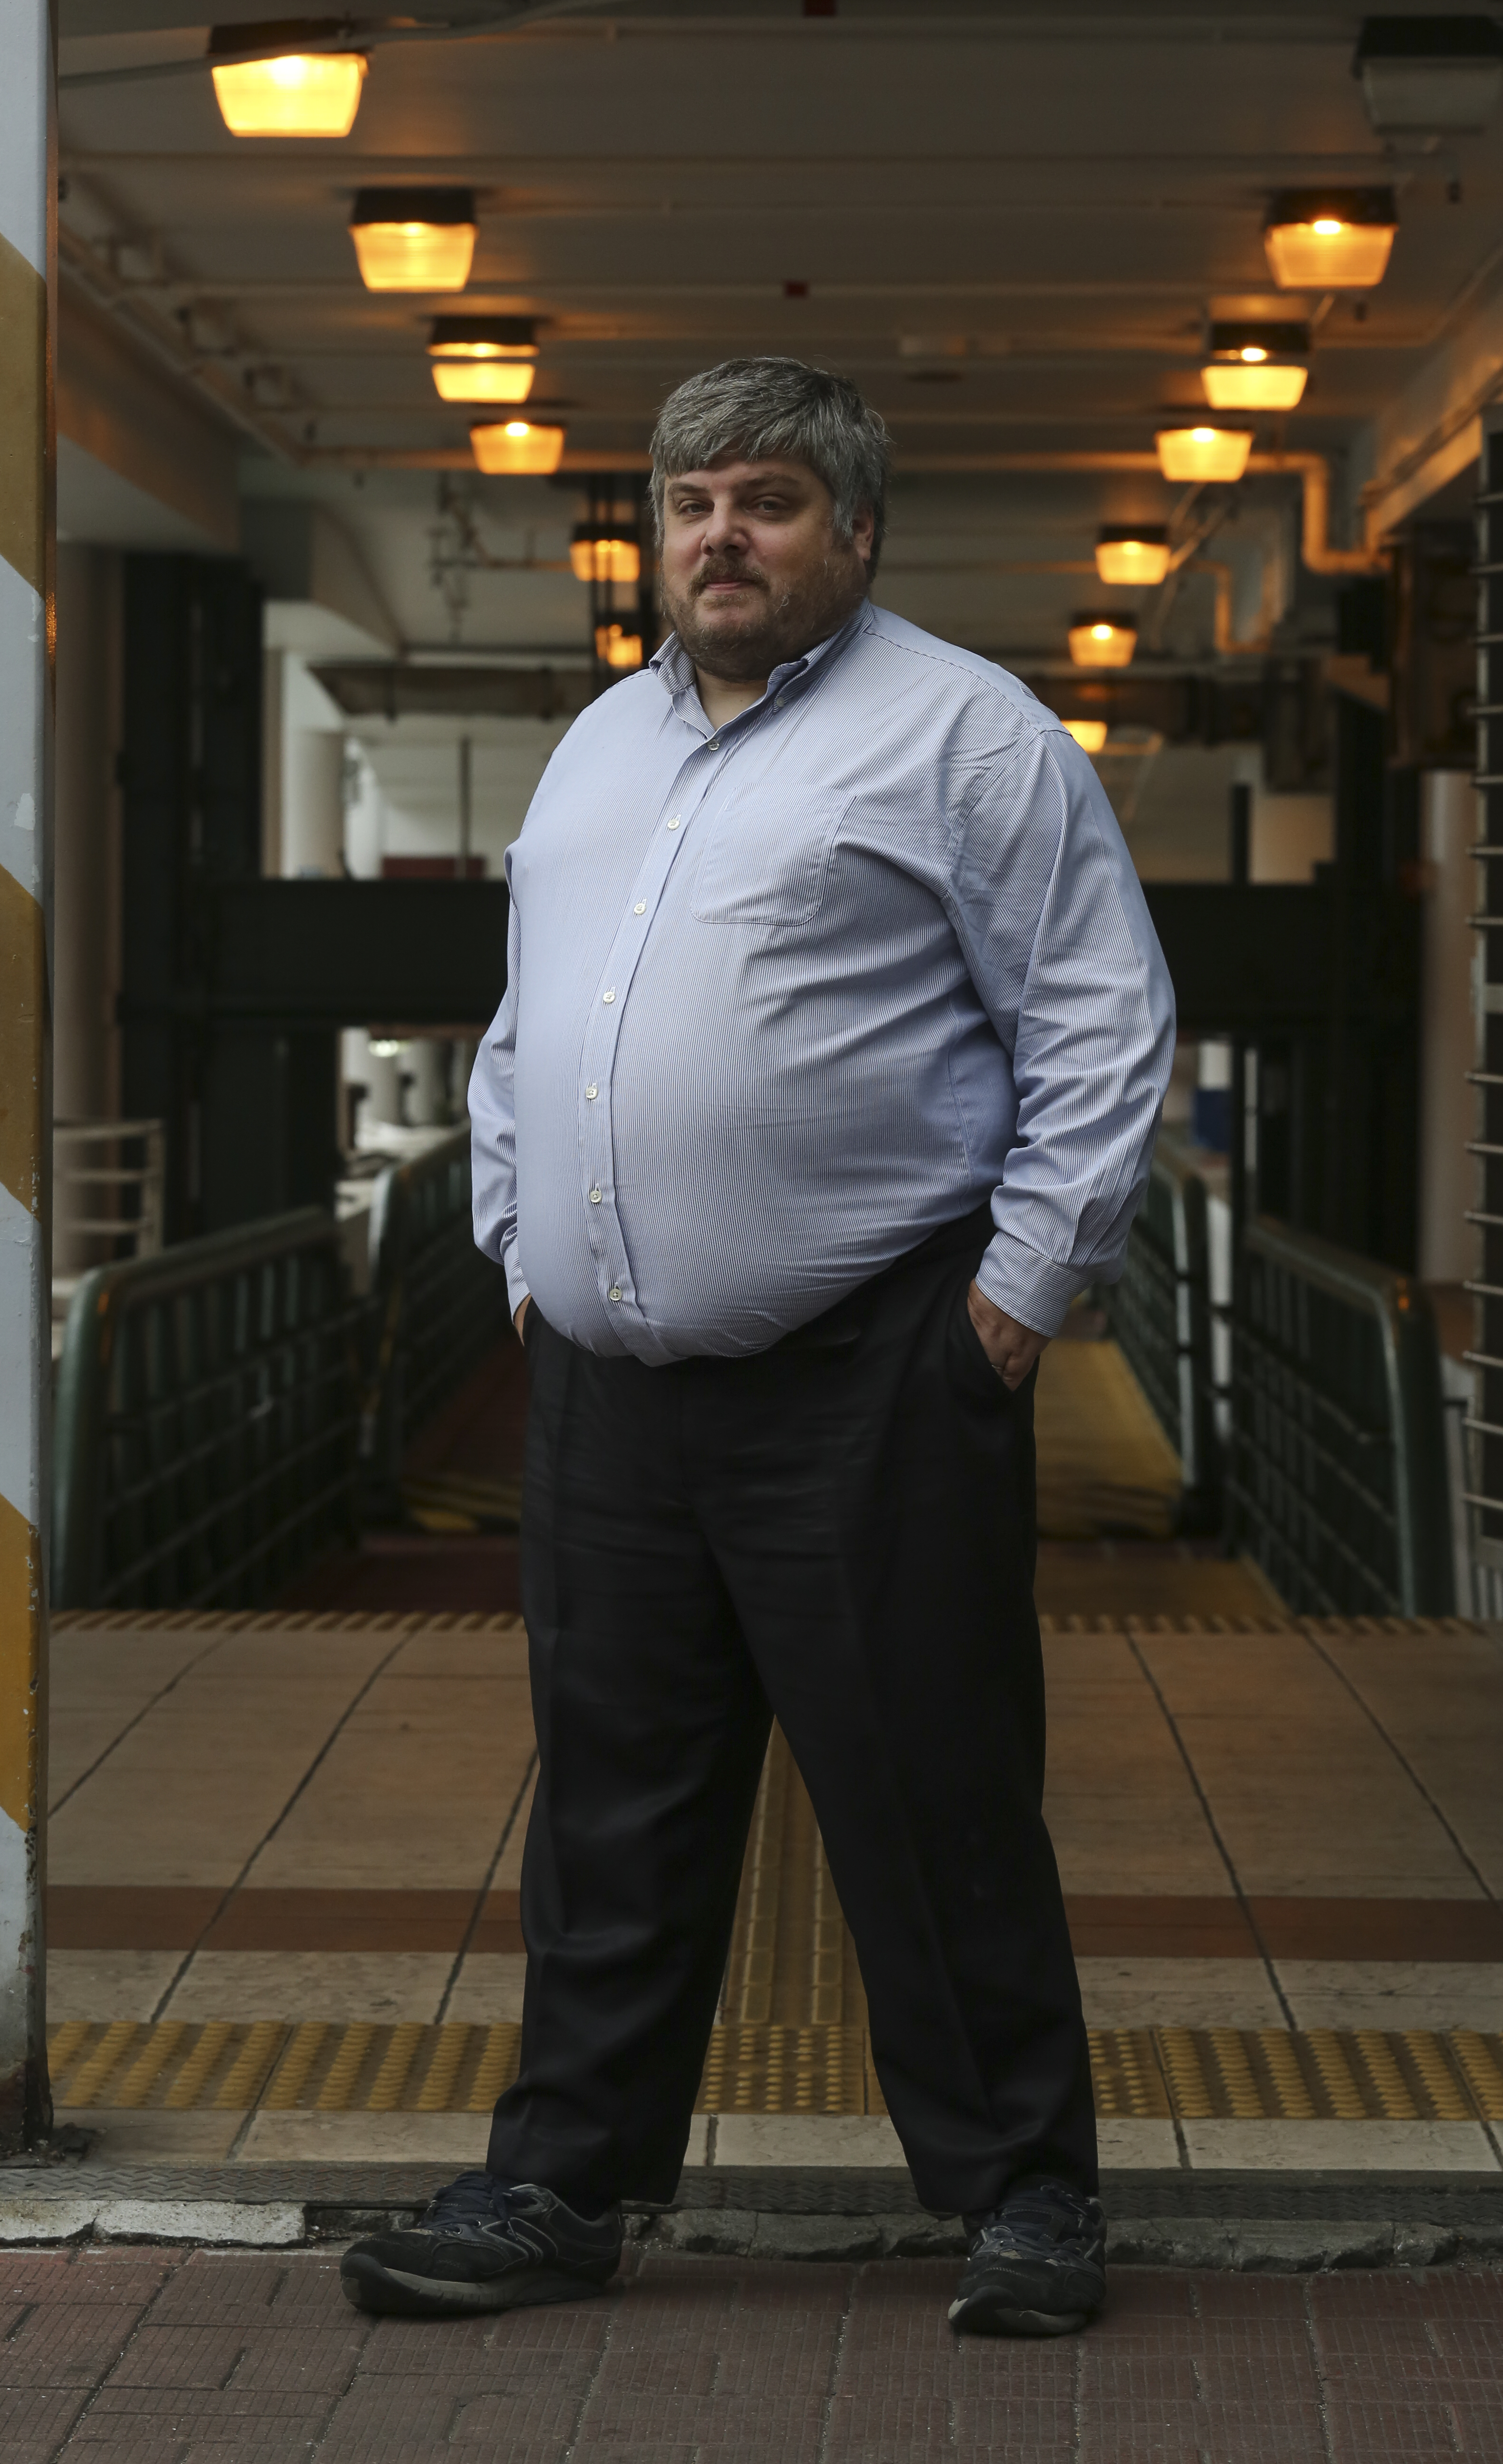 This image shows a portrait of Mischa Moselle, severely obese, and about to walk through India. 12NOV15 [FEATURES HEALTH]